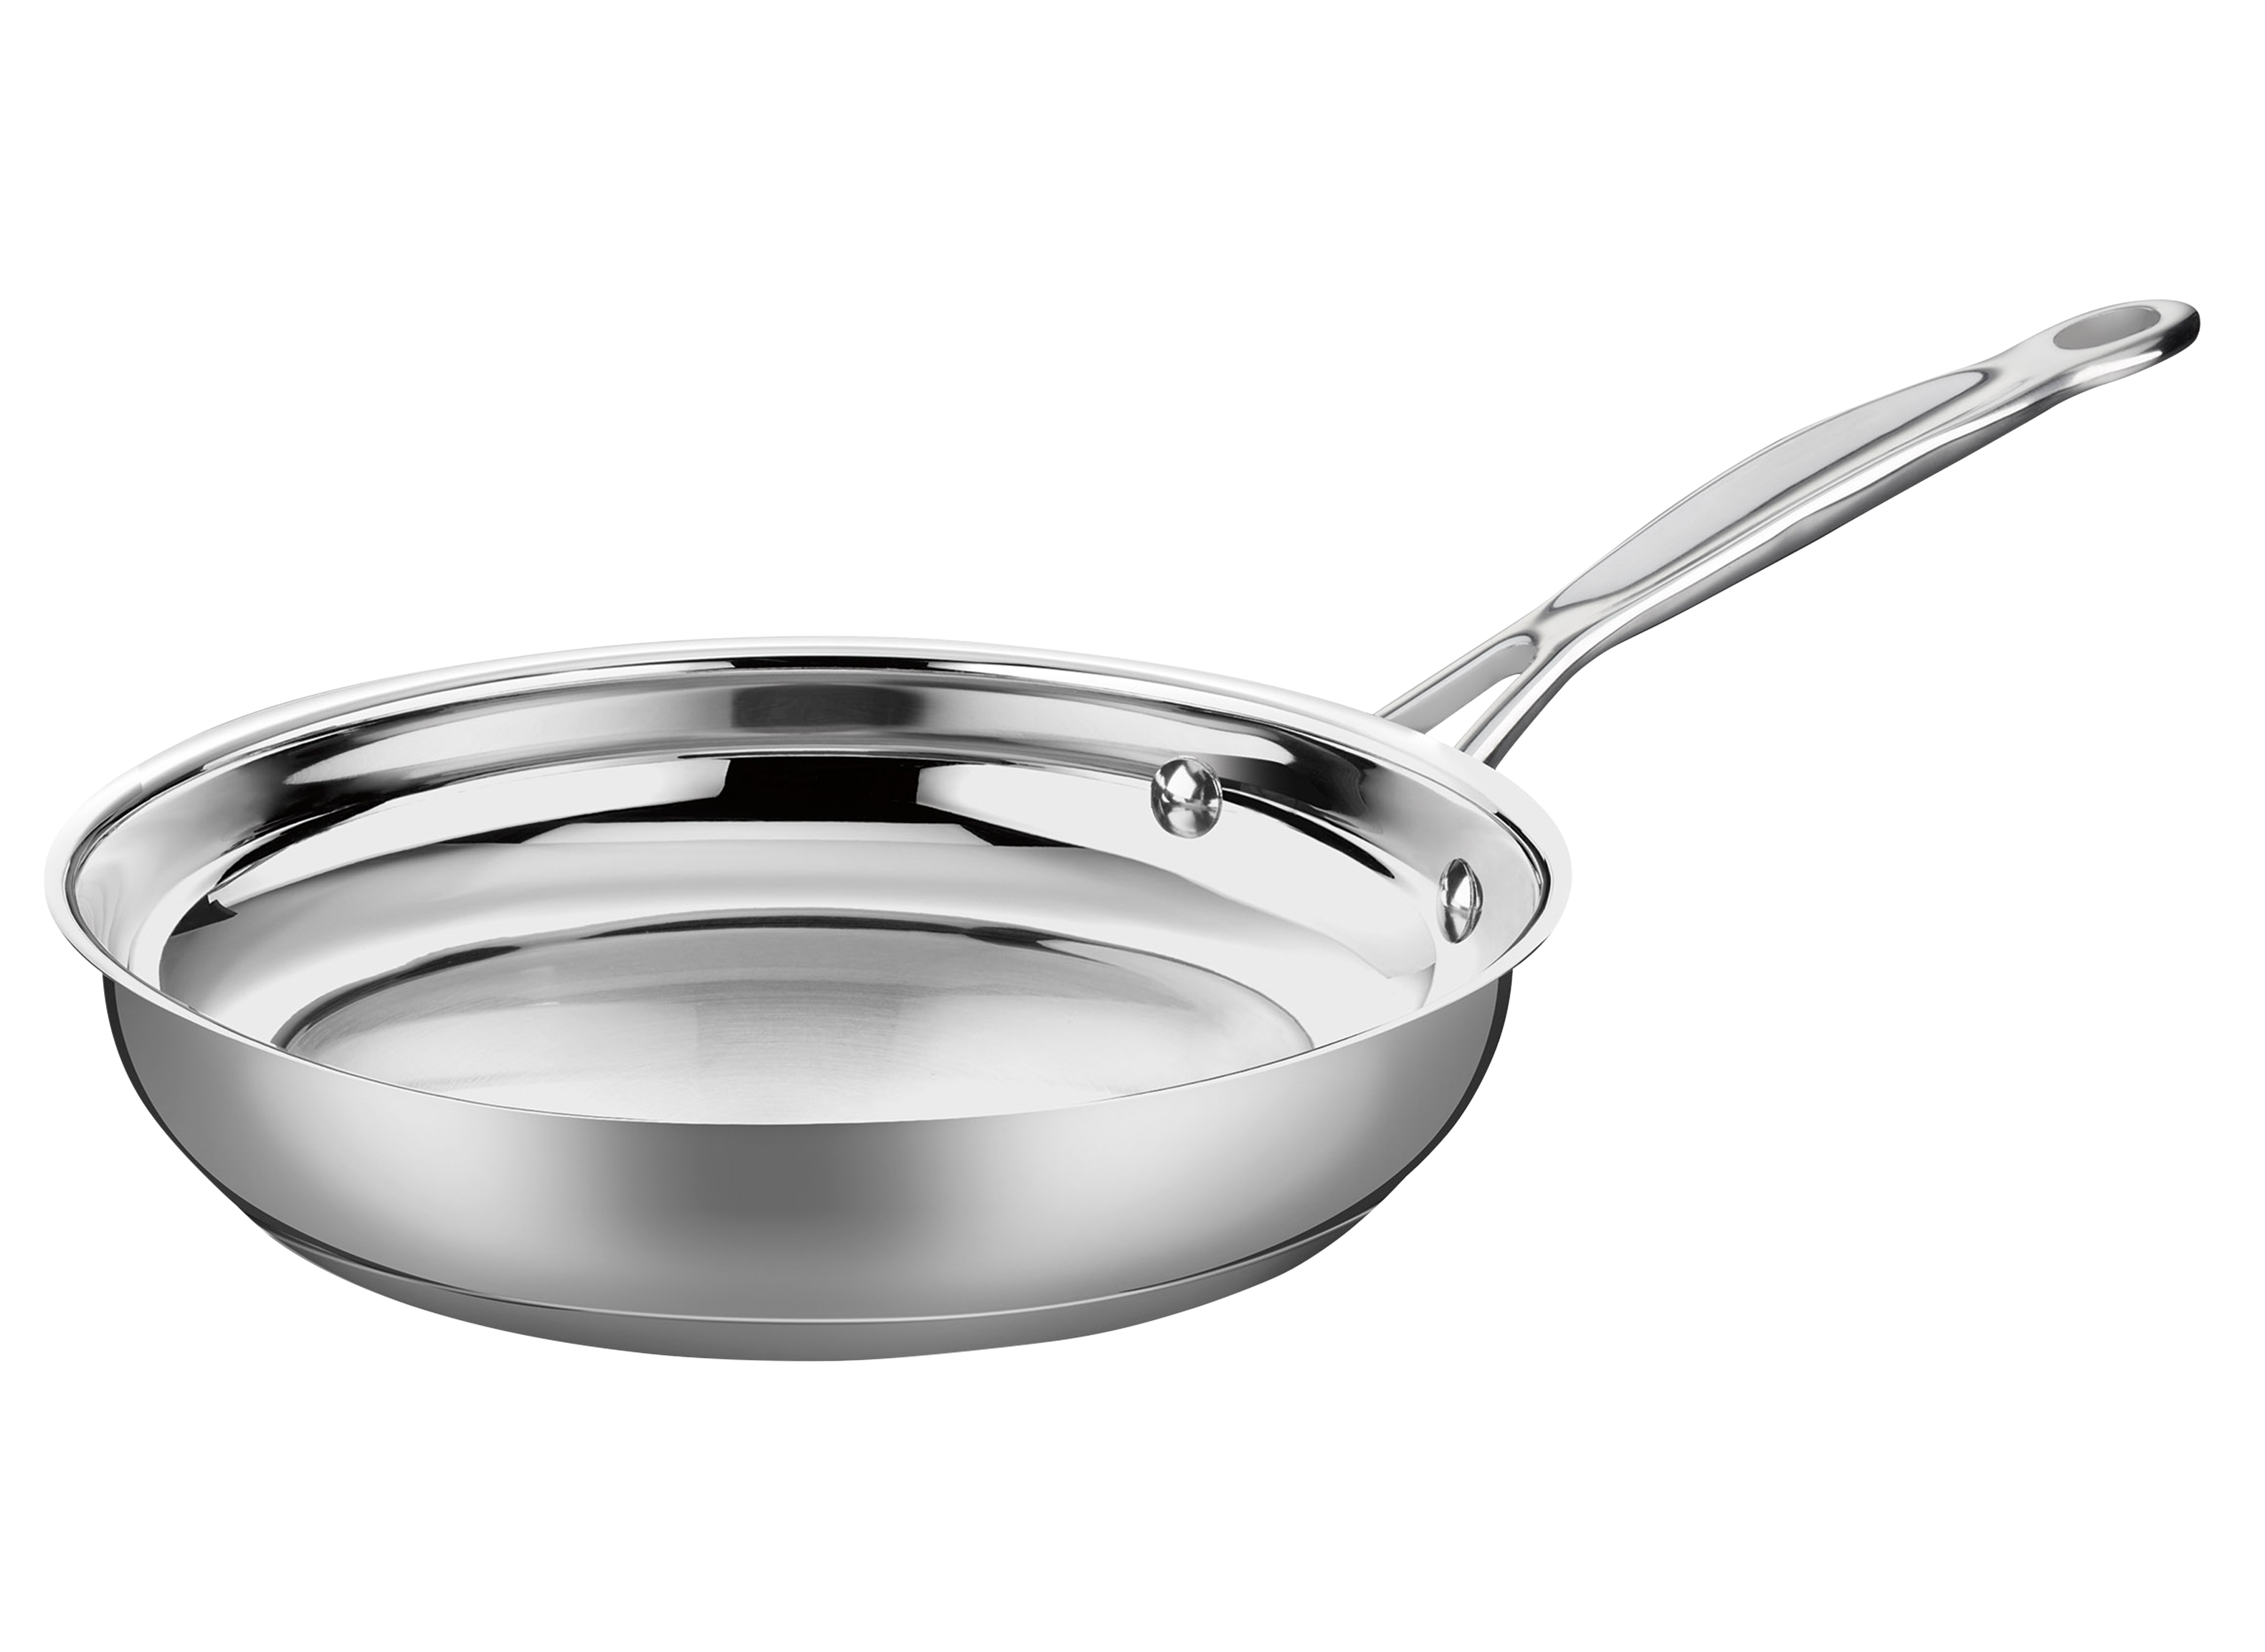 Cuisinart Chef's Classic Stainless Cookware Review - Consumer Reports